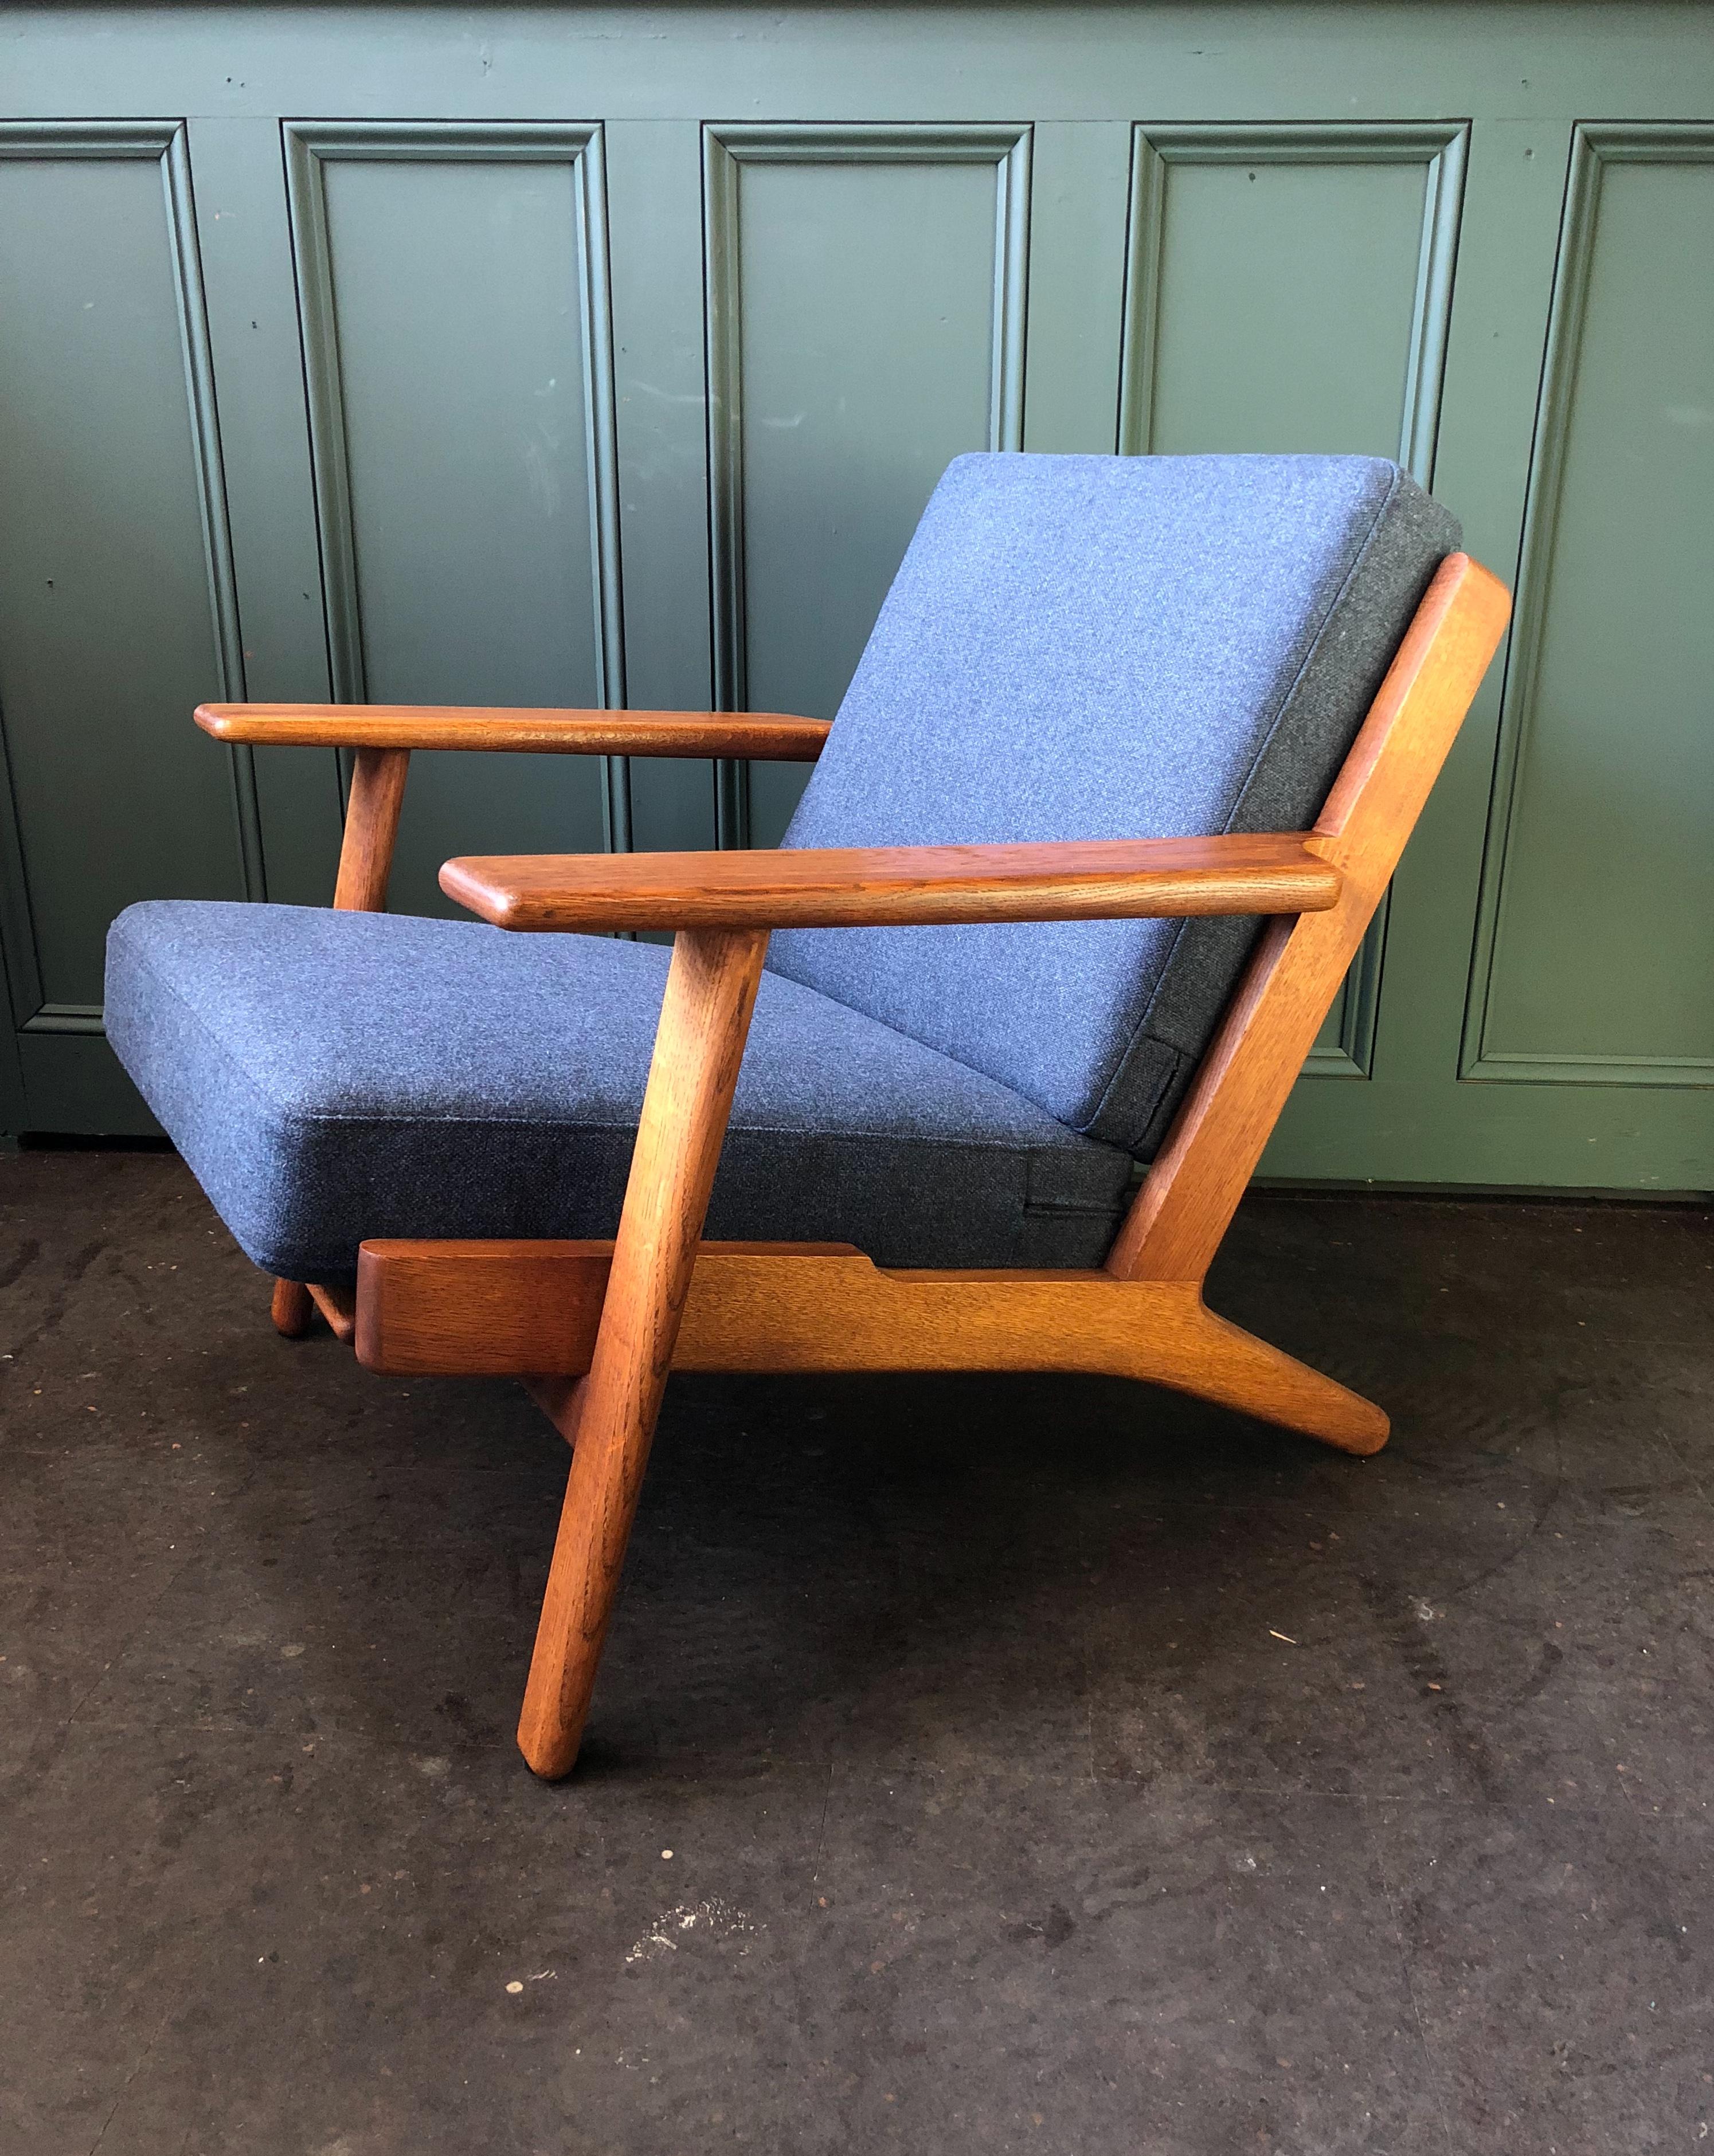 20th Century Hans Wegner Armchair, ge290, 1950s, Fully Refurbished and Reupholstered